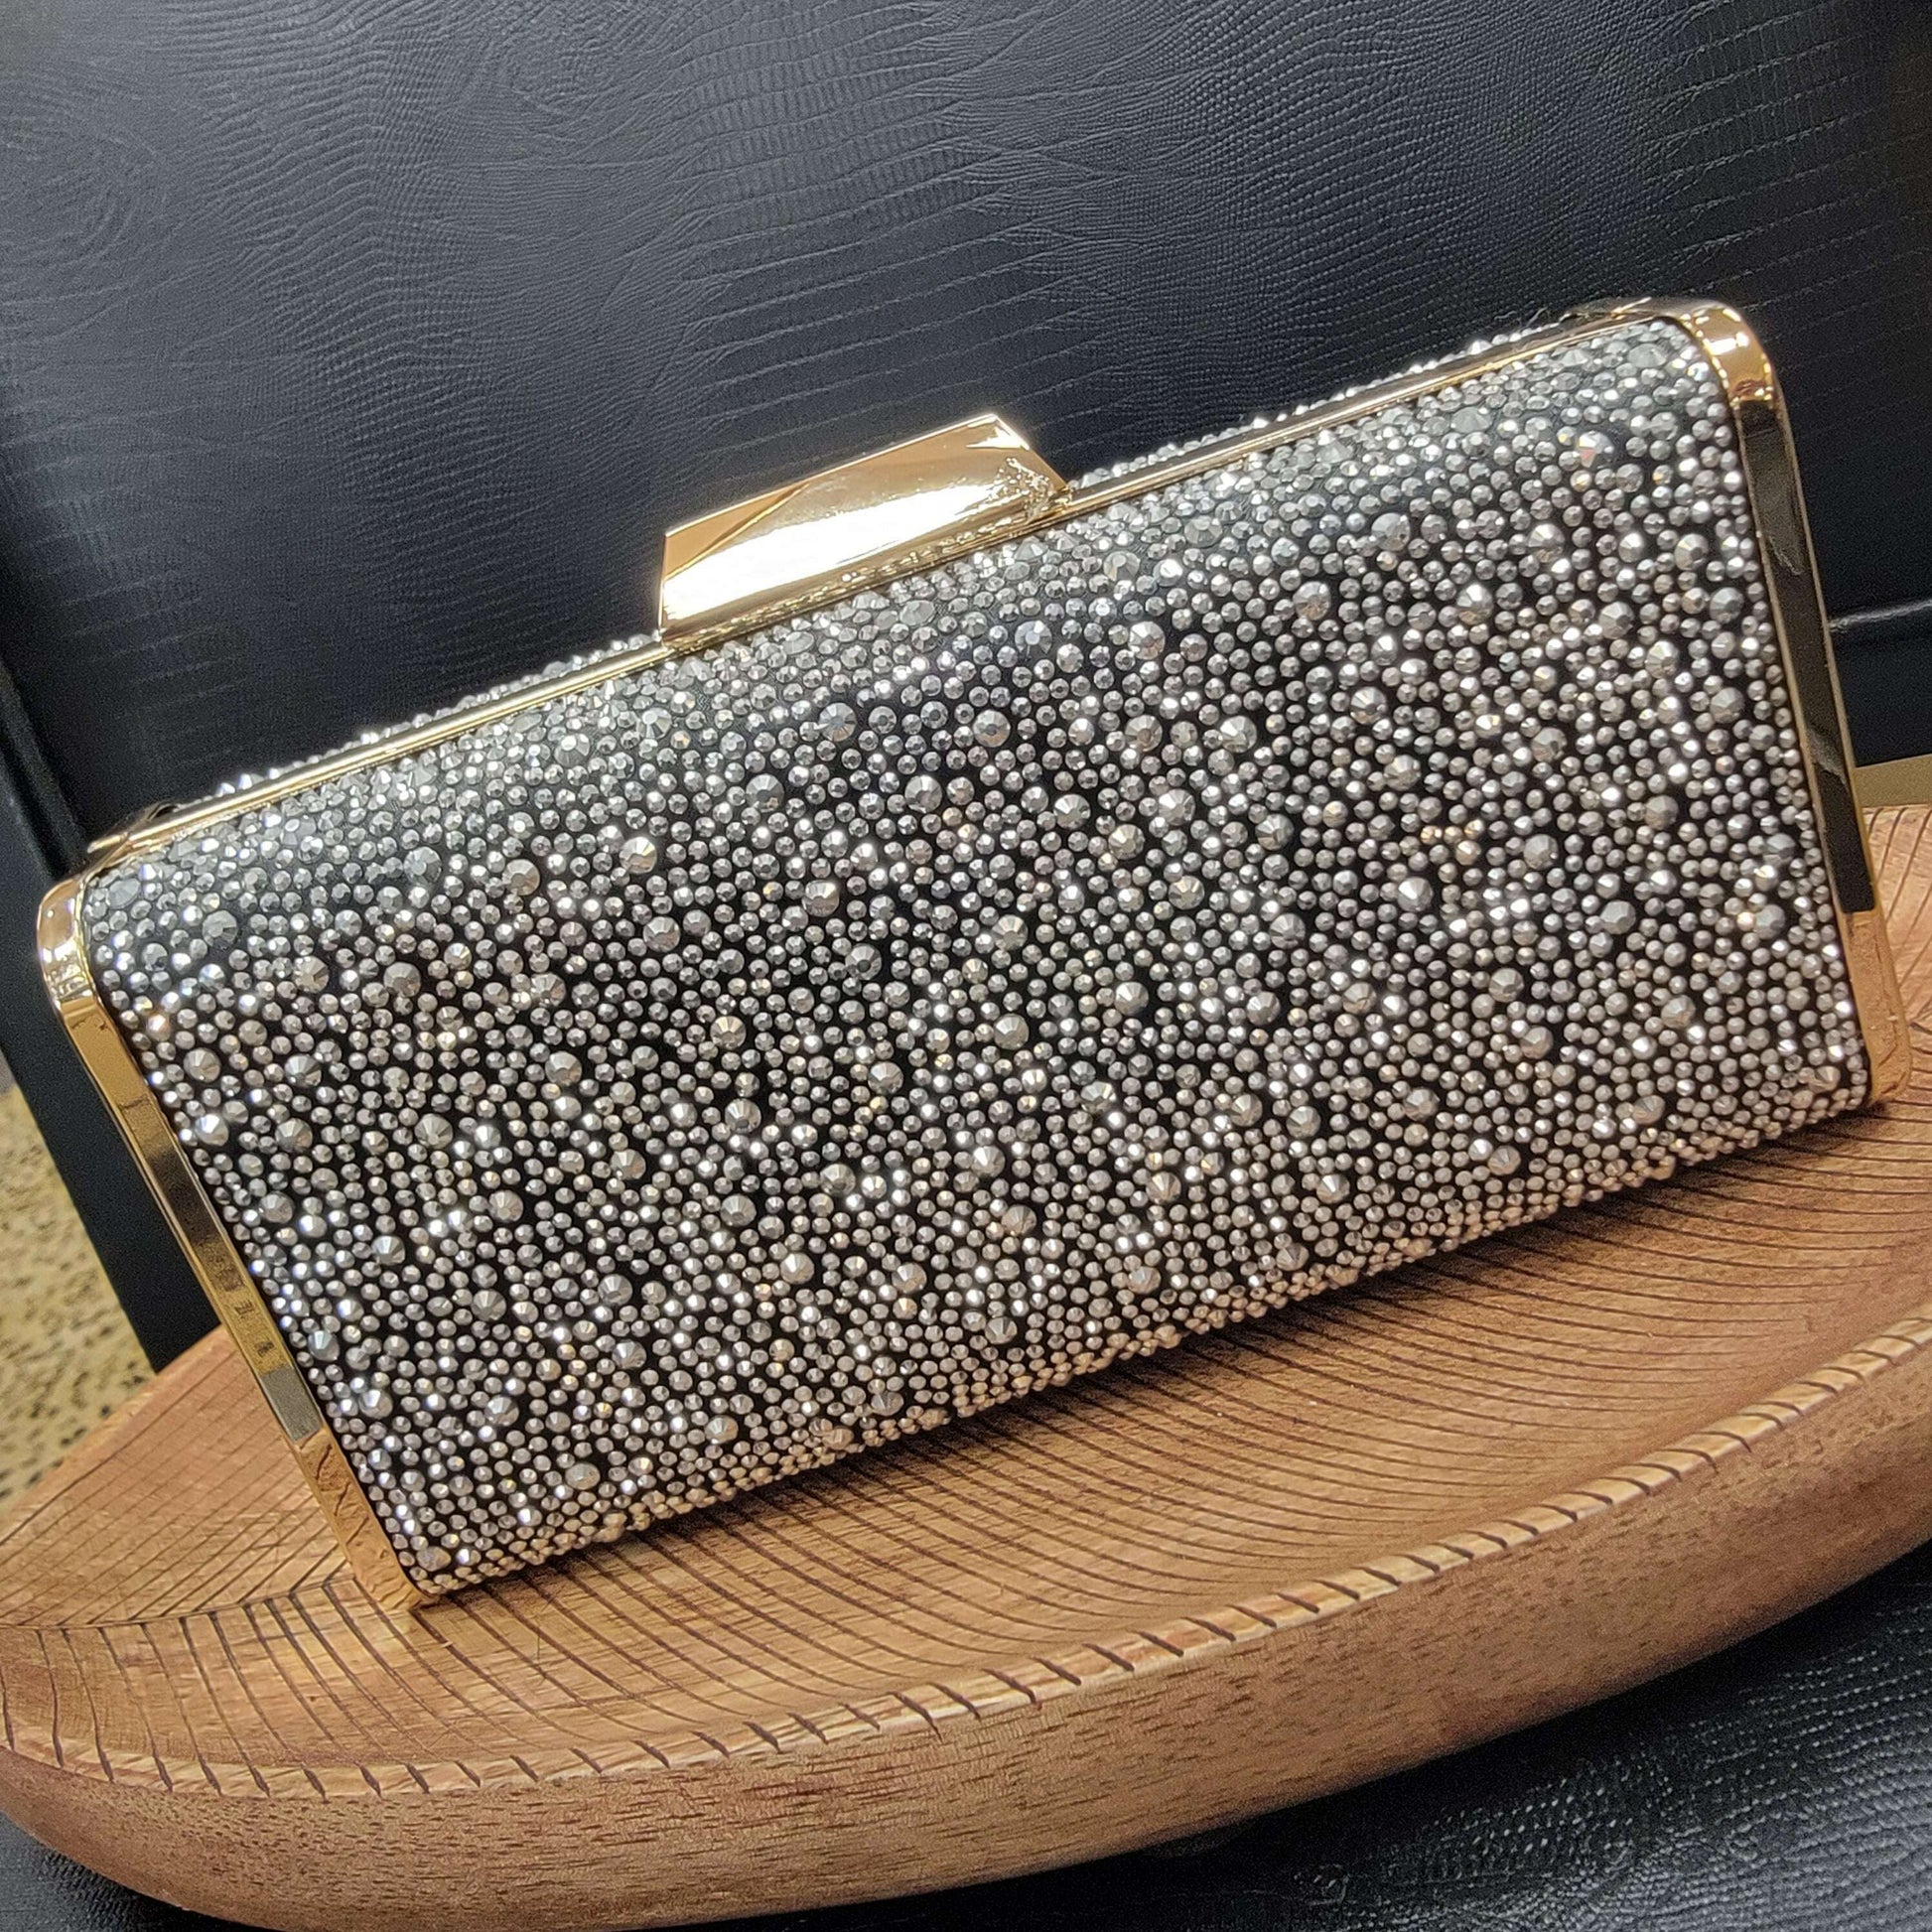 URBAN EXPRESSIONS - Madelyn Evening Bag - Black & Gold, ACCESSORIES, Urban Expression, Plum Bottom